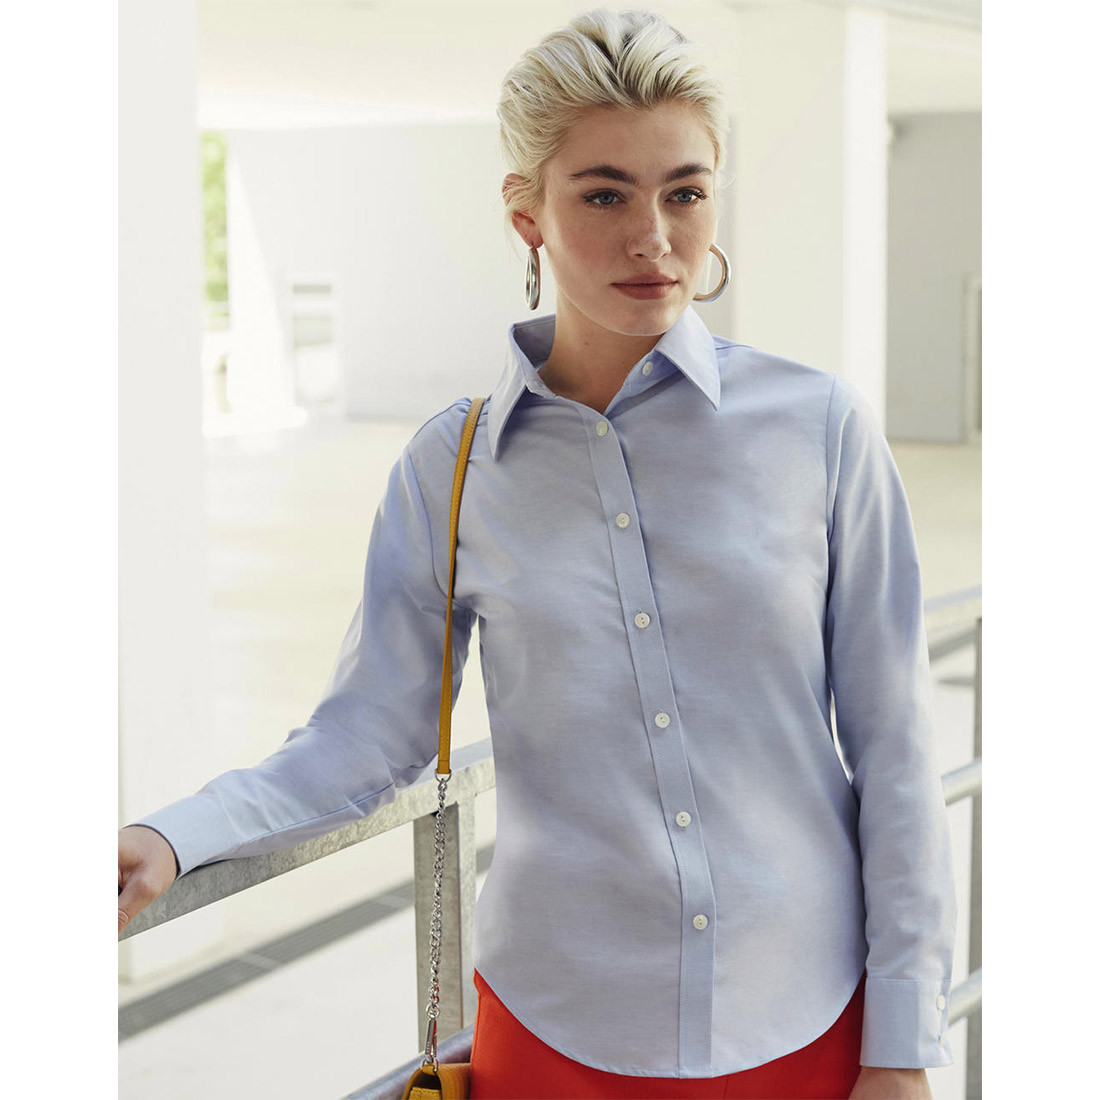 Lady-Fit Long Sleeve Oxford Shirt - Safetywear